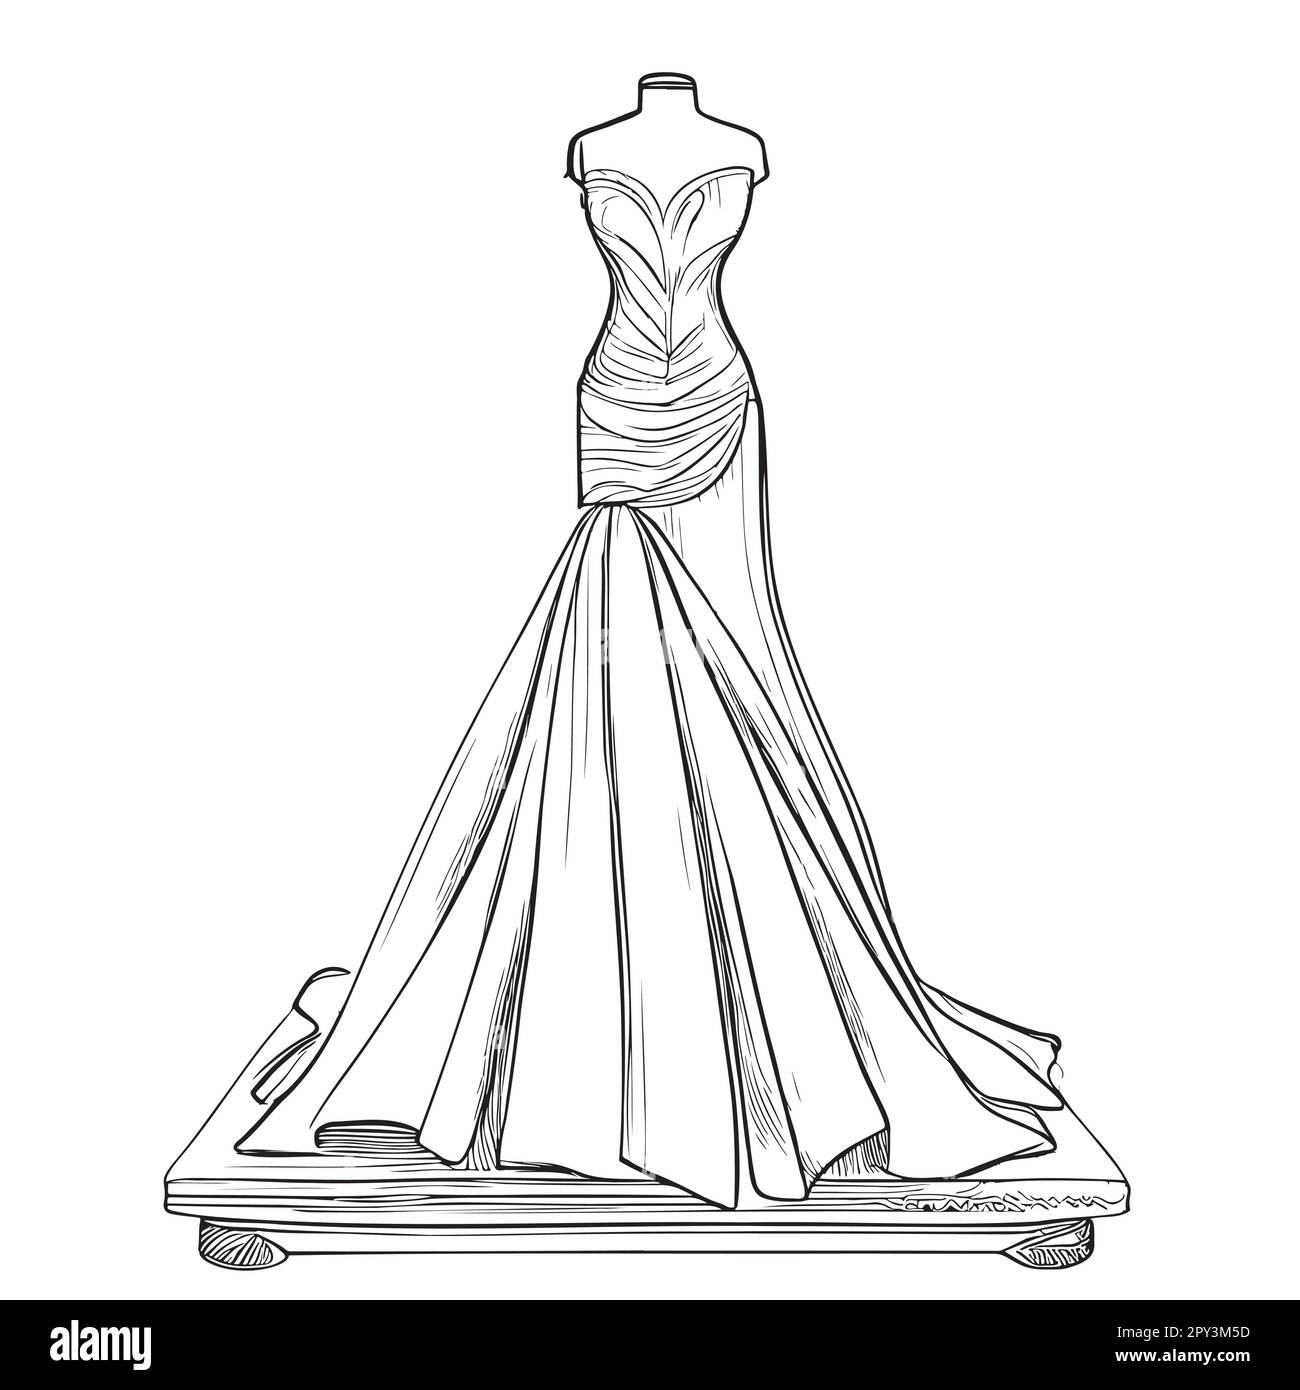 Dress sketch hand drawn in doodle style illustration Stock Vector Image ...